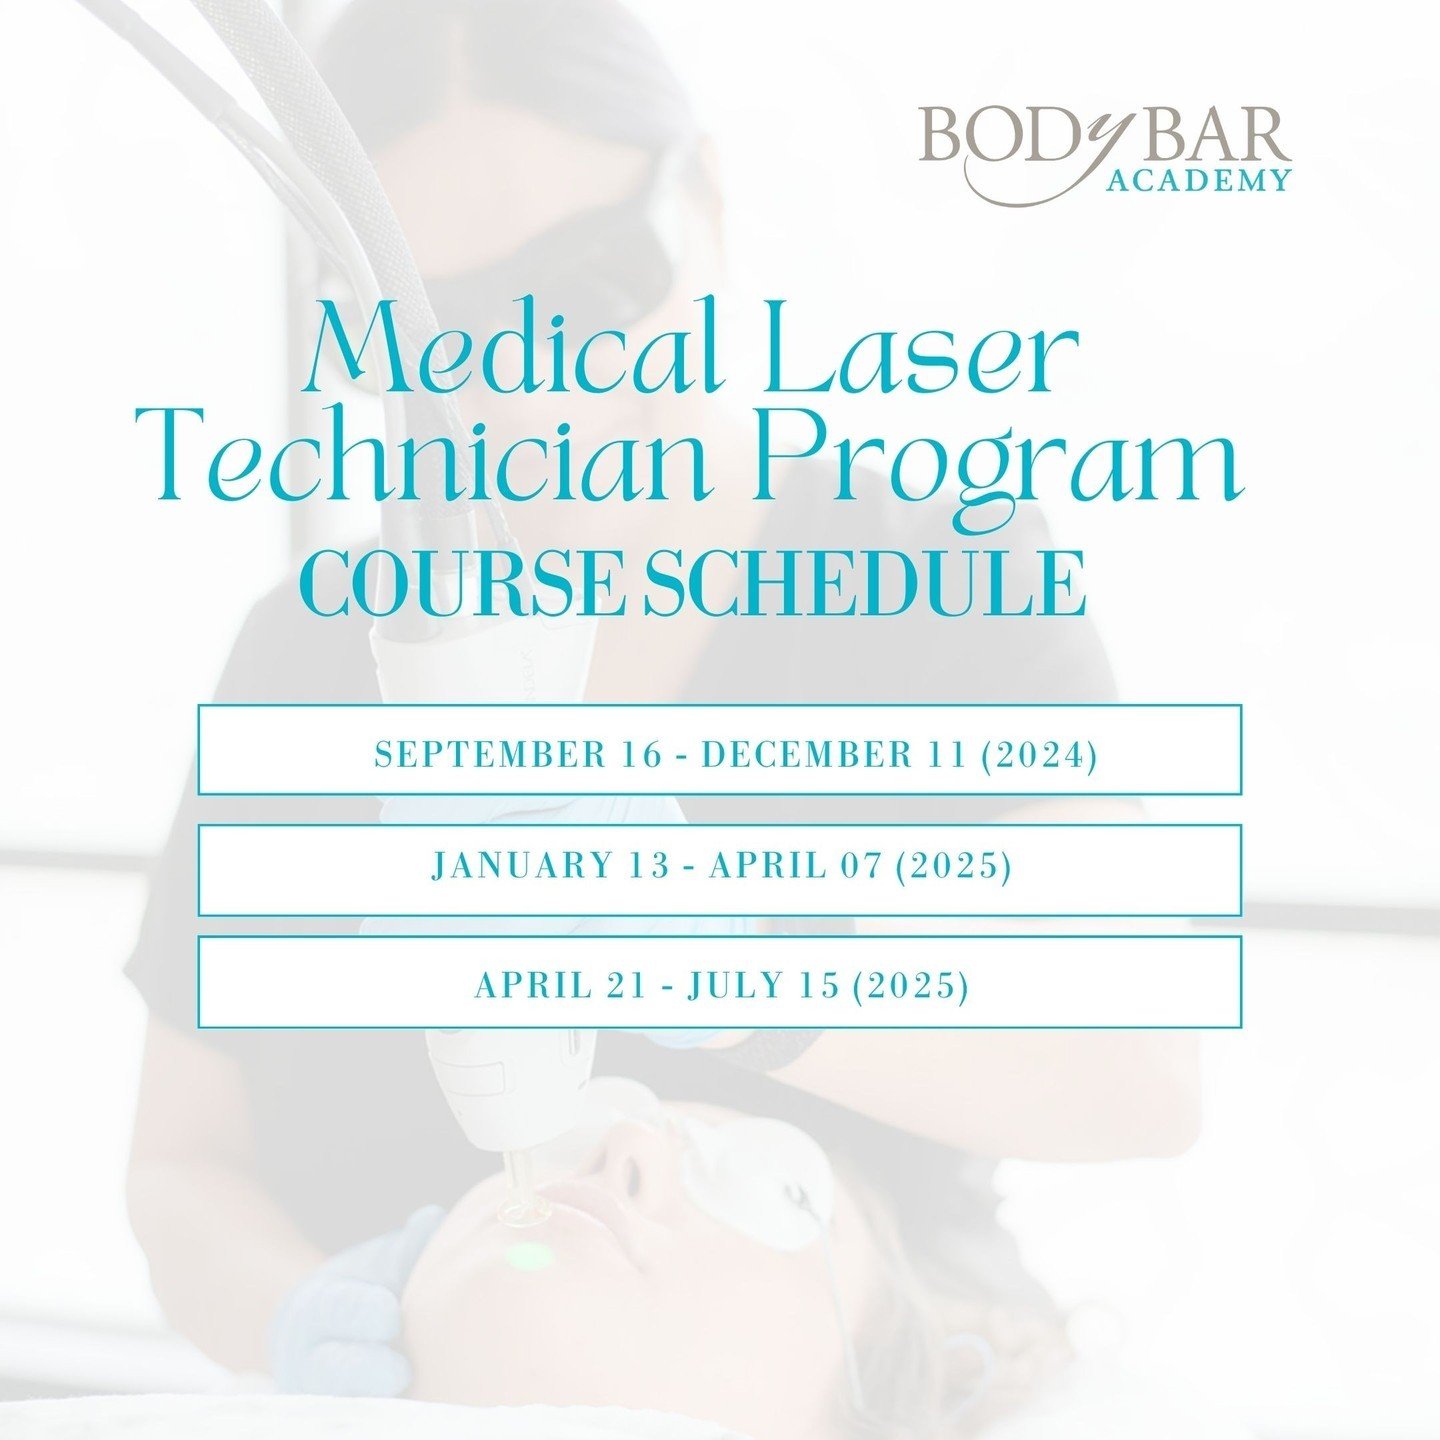 Become a Certified Medical Laser Technician with Body Bar Academy! Join our upcoming Medical Laser Technician course on the following dates:⁠
⁠
◻️September 16 - December 11, 2024◻️⁠
Duration: 12 weeks (3 months)⁠
Ideal for those seeking fall/winter t